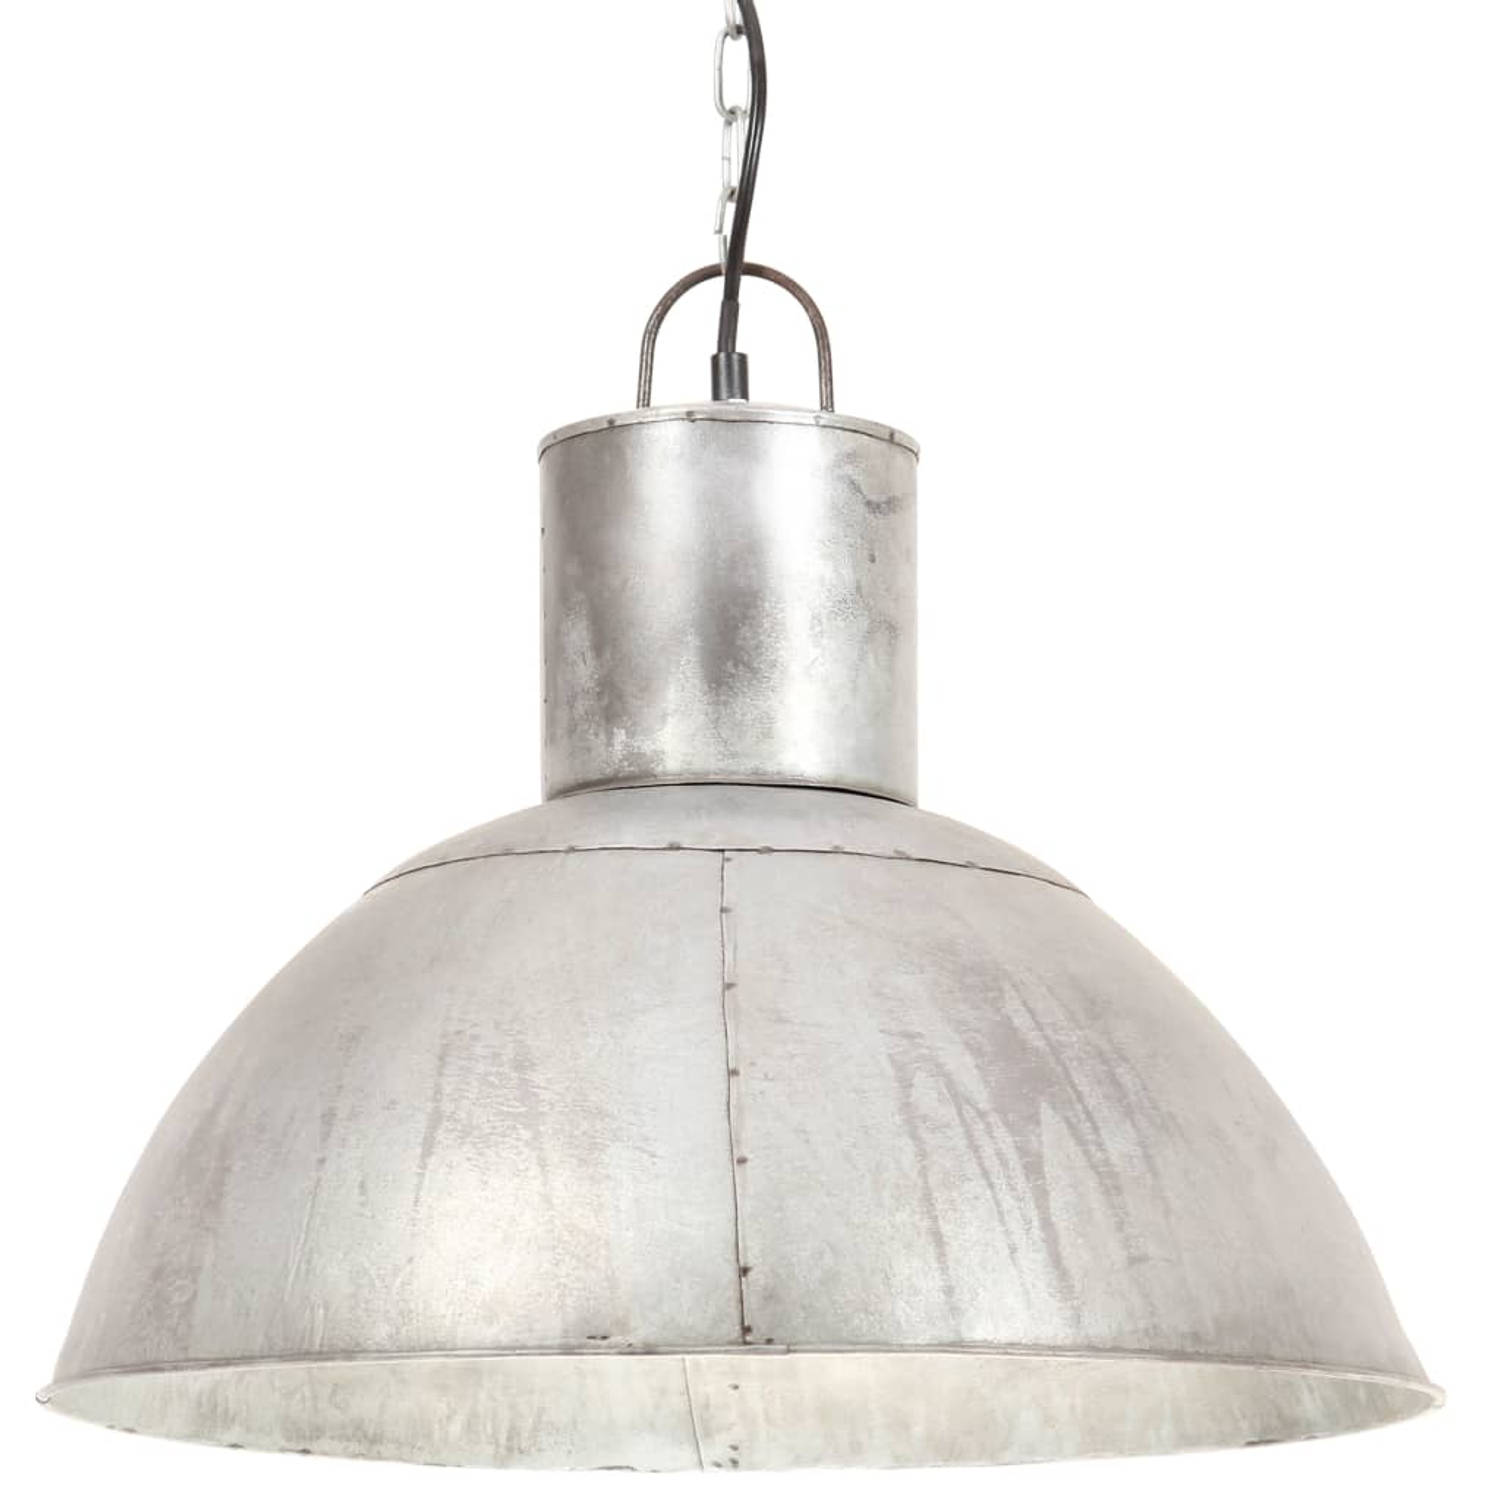 The Living Store Hanglamp Iron Silver - 48 x 41 cm - E27 fitting - 25W - Inclusief bevestigingsmateriaal